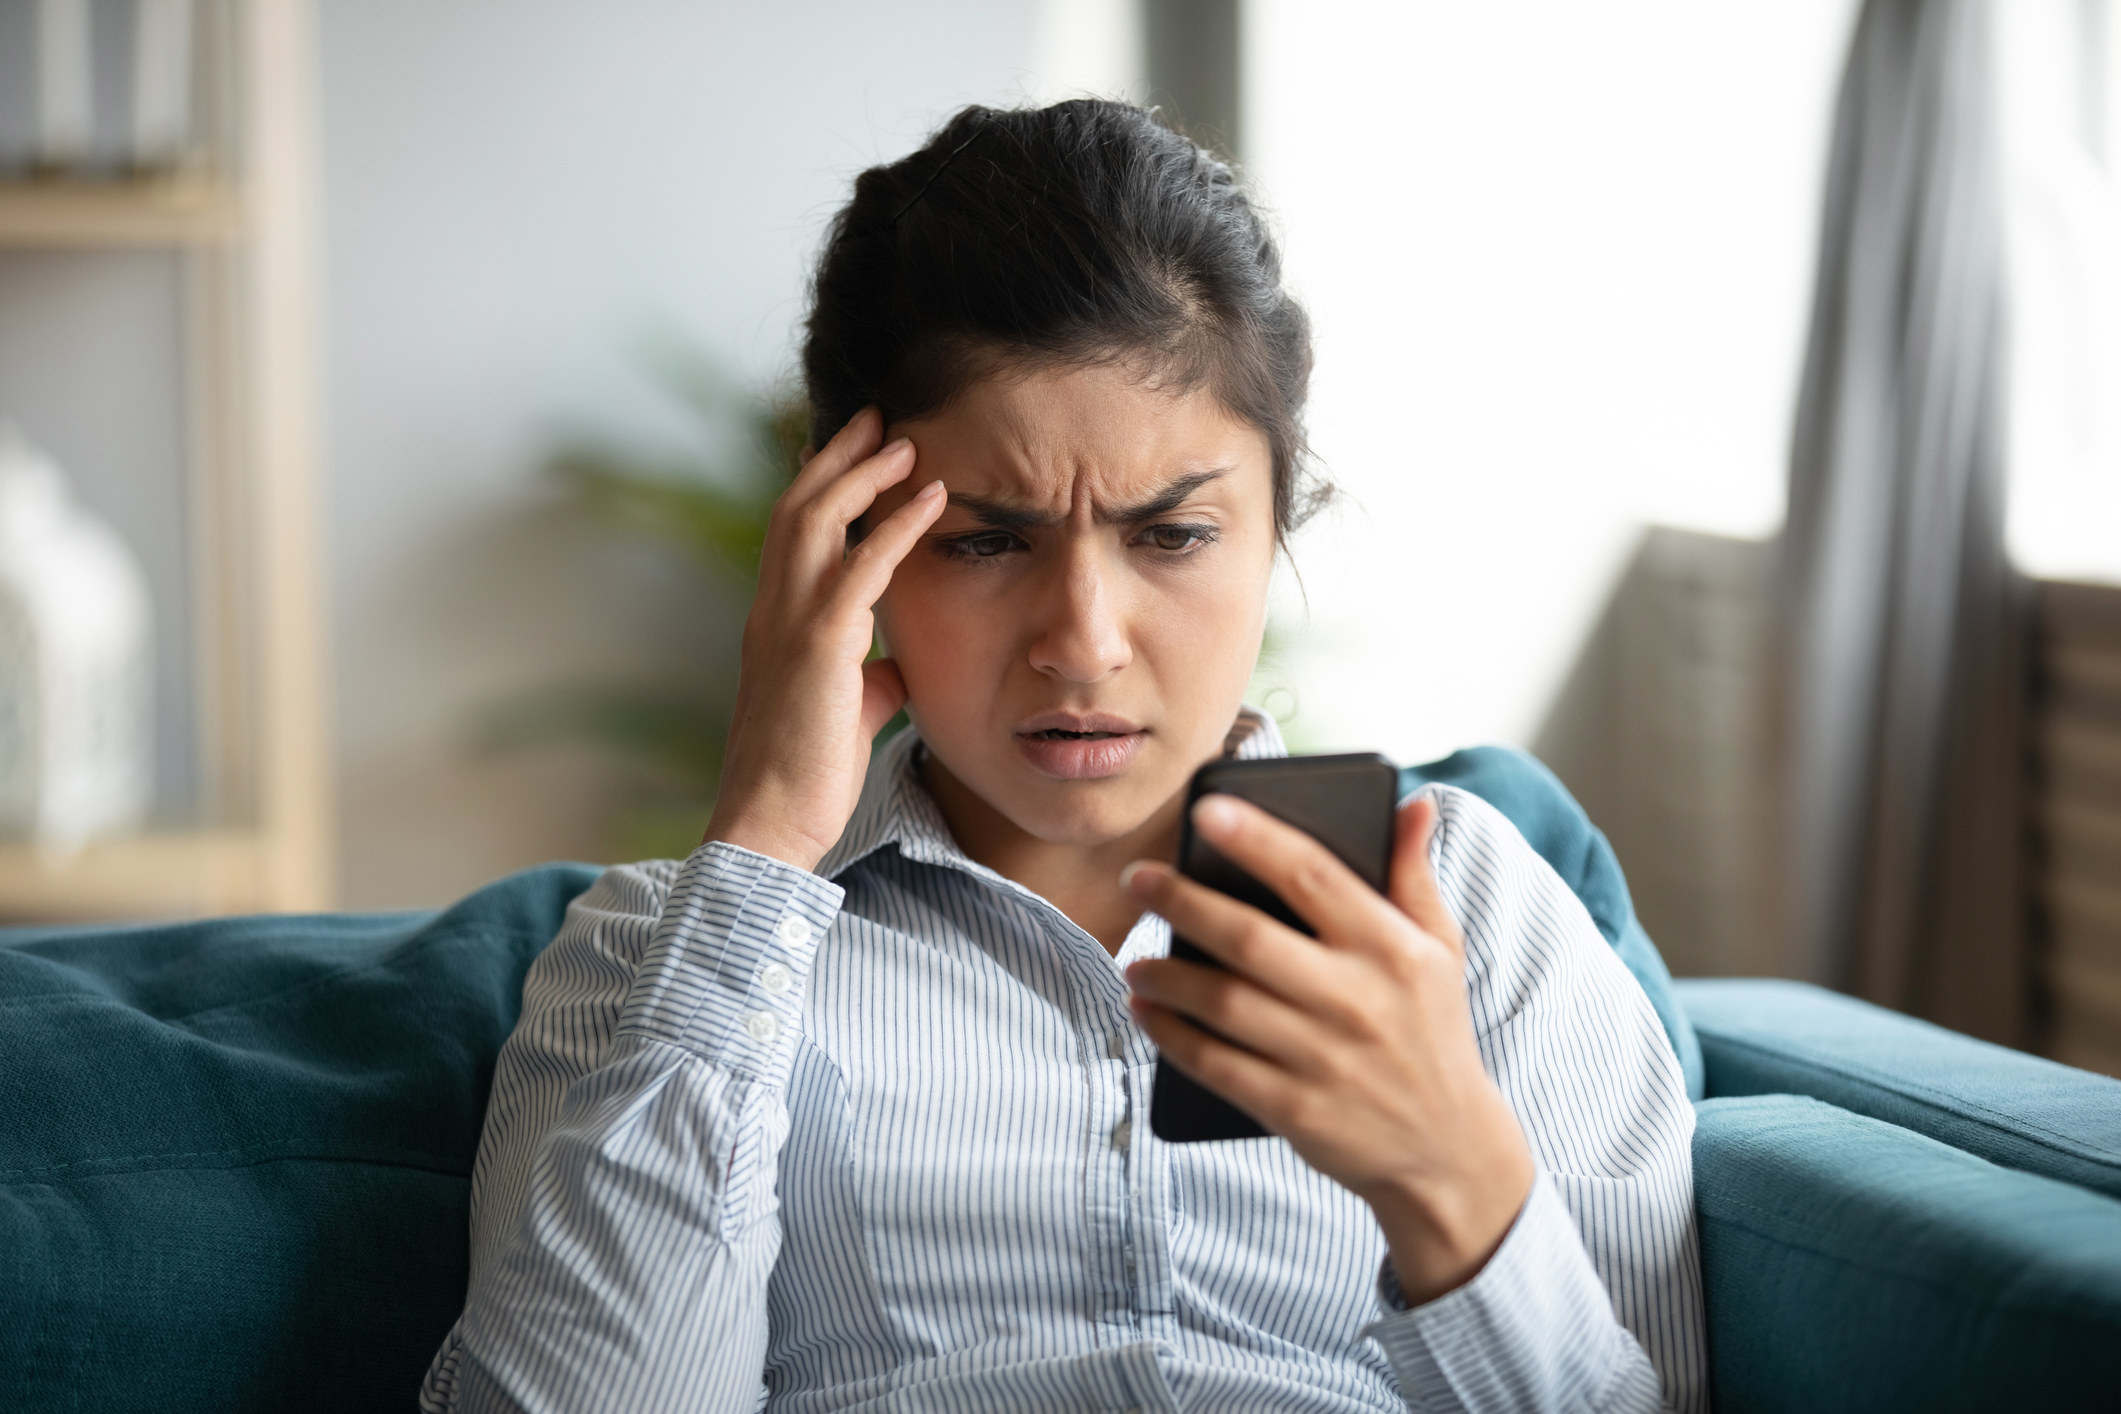 photo of a woman reading her phone in disgust